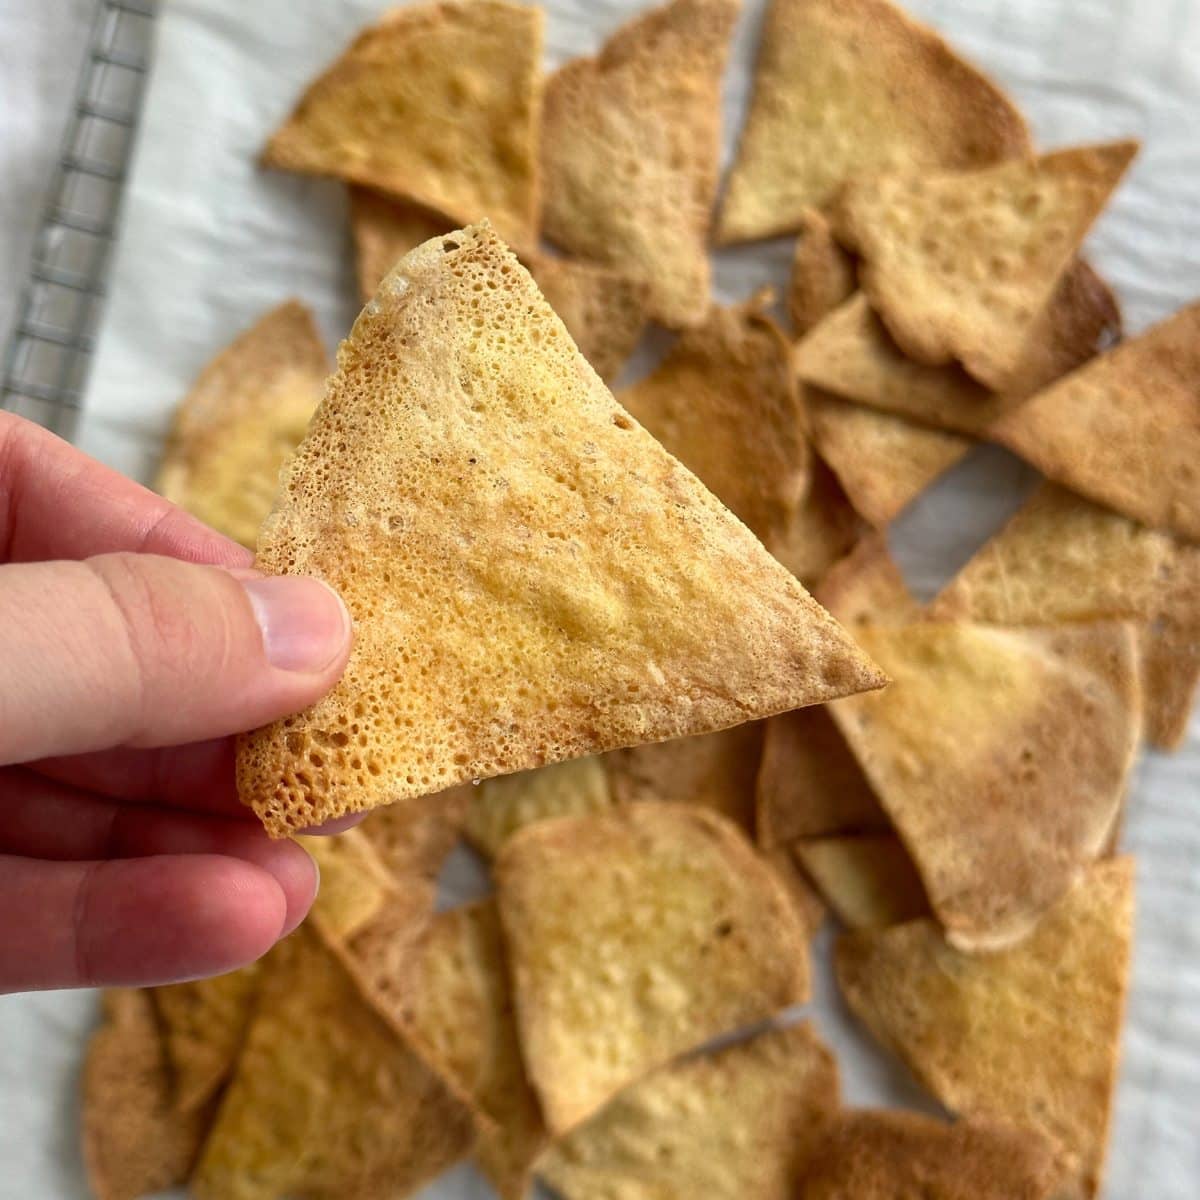 Chickpea tortilla chip being held with more chickpea chips on a parchment sheet in the background.